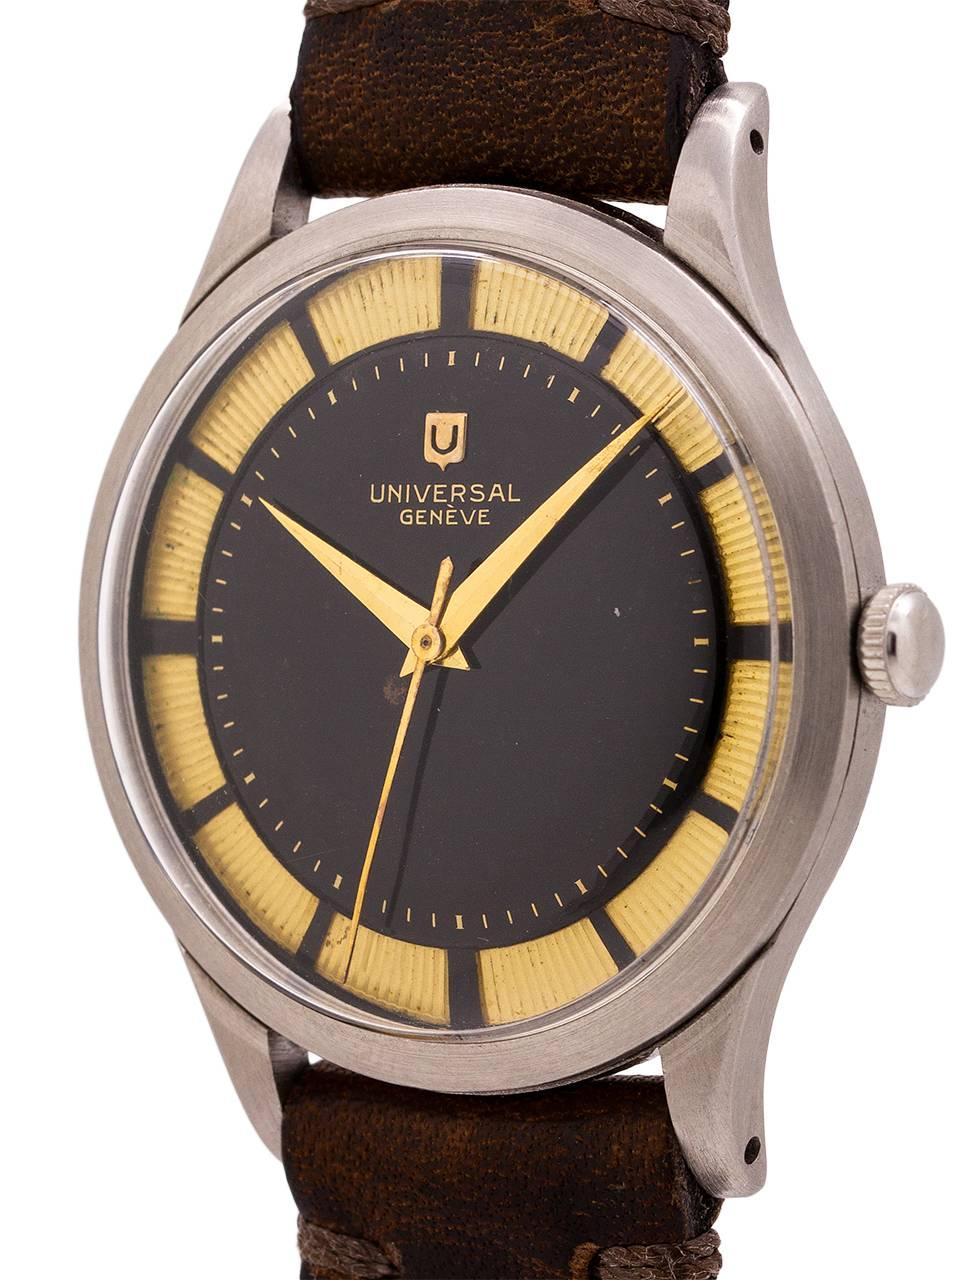 
A great looking and Universal Geneve manual wind watch, circa 1950’s. With a Polerouter style dial with black inner ring, and gold fluted outer ring with black five minute markers. Featuring a 35mm diameter, stainless steel case with snap down